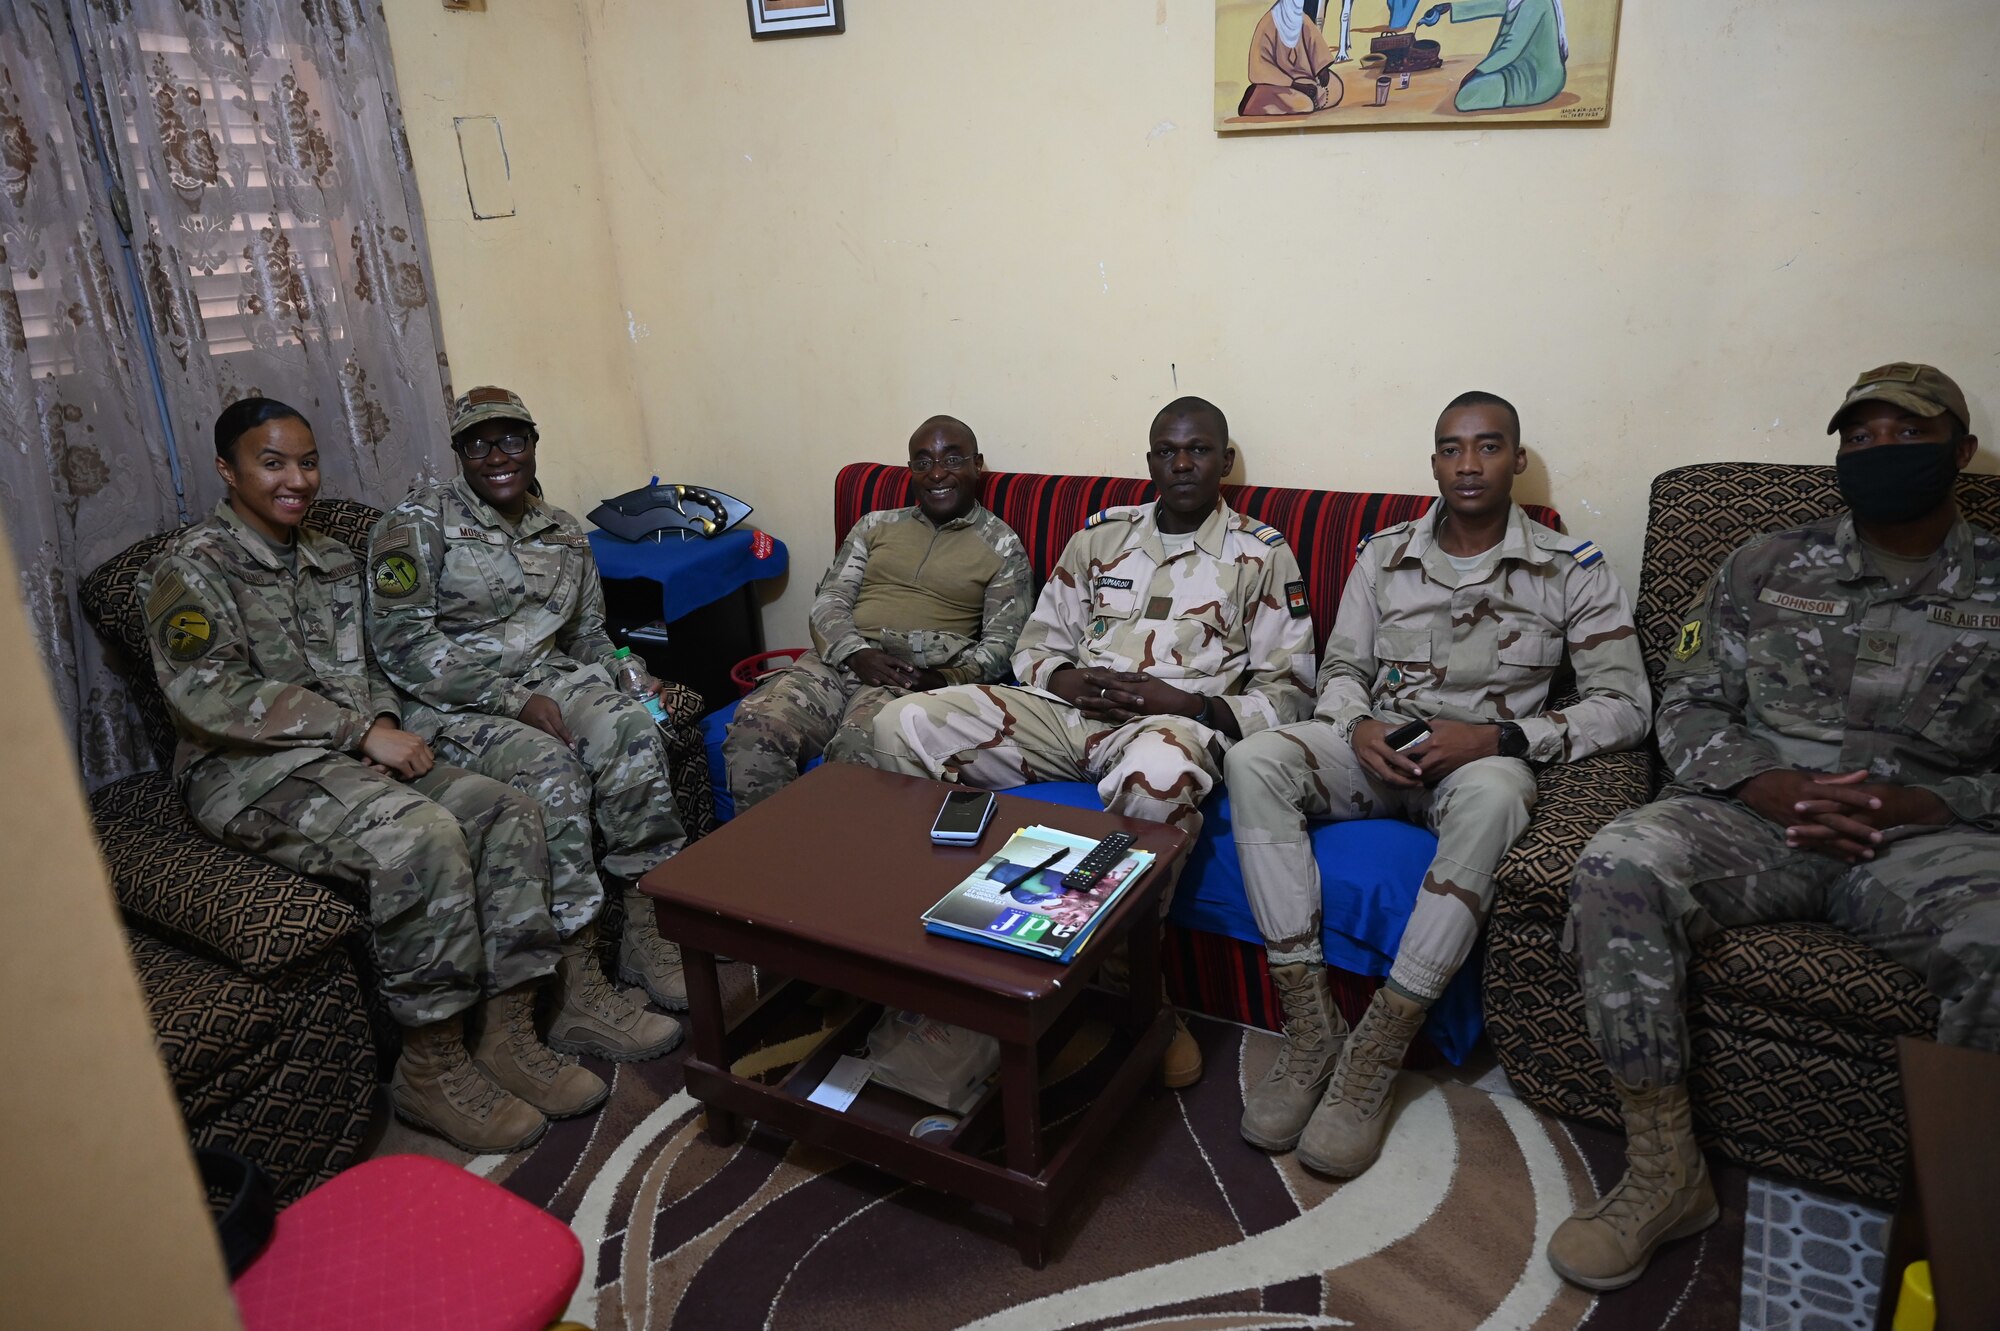 U.S. Air Force members assigned to Nigerien Air Base 201 pose for a photo with members from the Nigerien Armed Forces at Nigerien Air Base 201, Agadez, July 8, 2021.